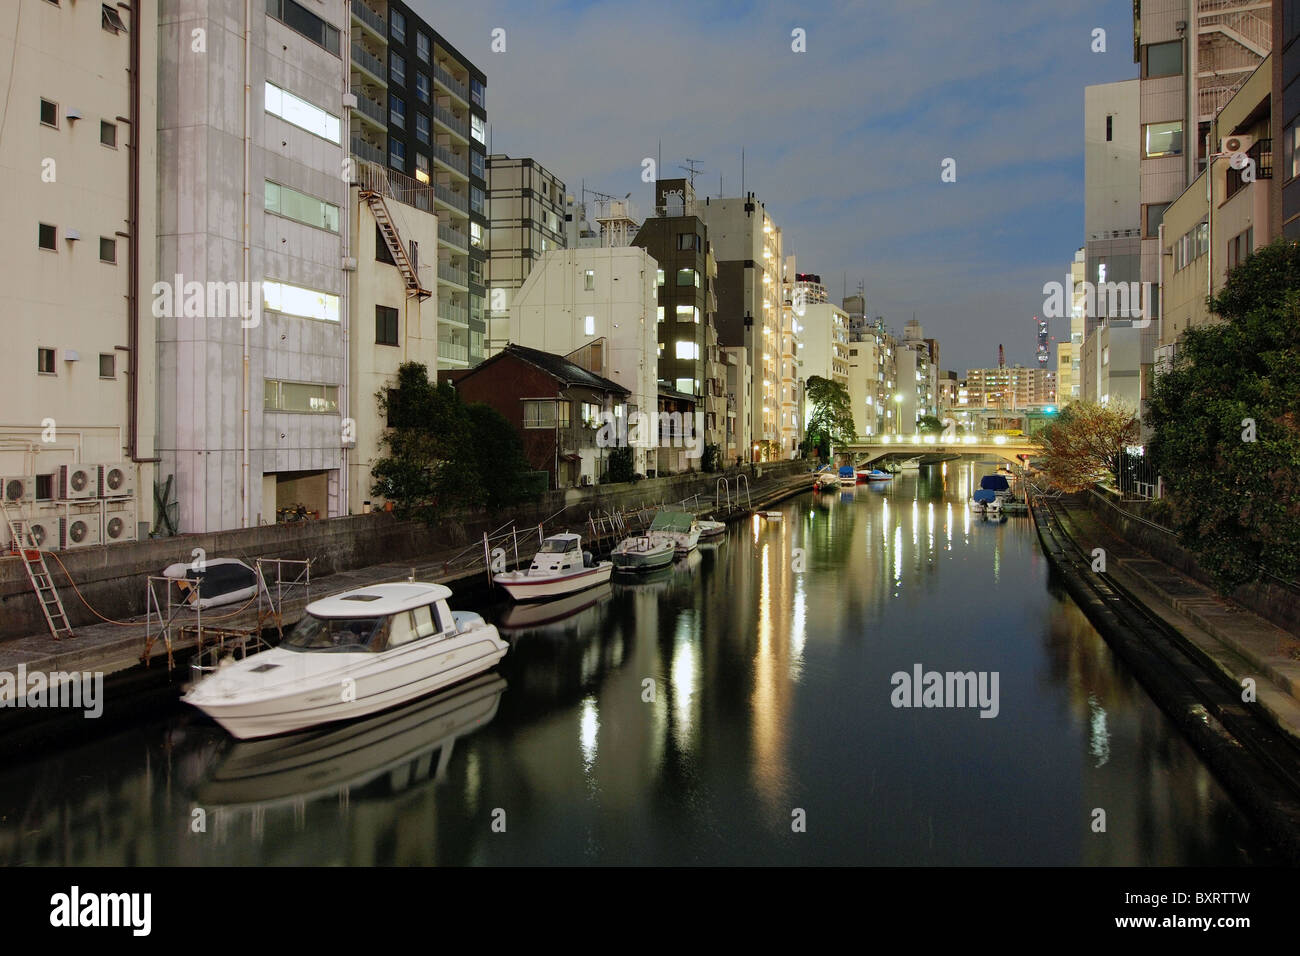 Housing property on a river canal in Tokyo Japan Stock Photo